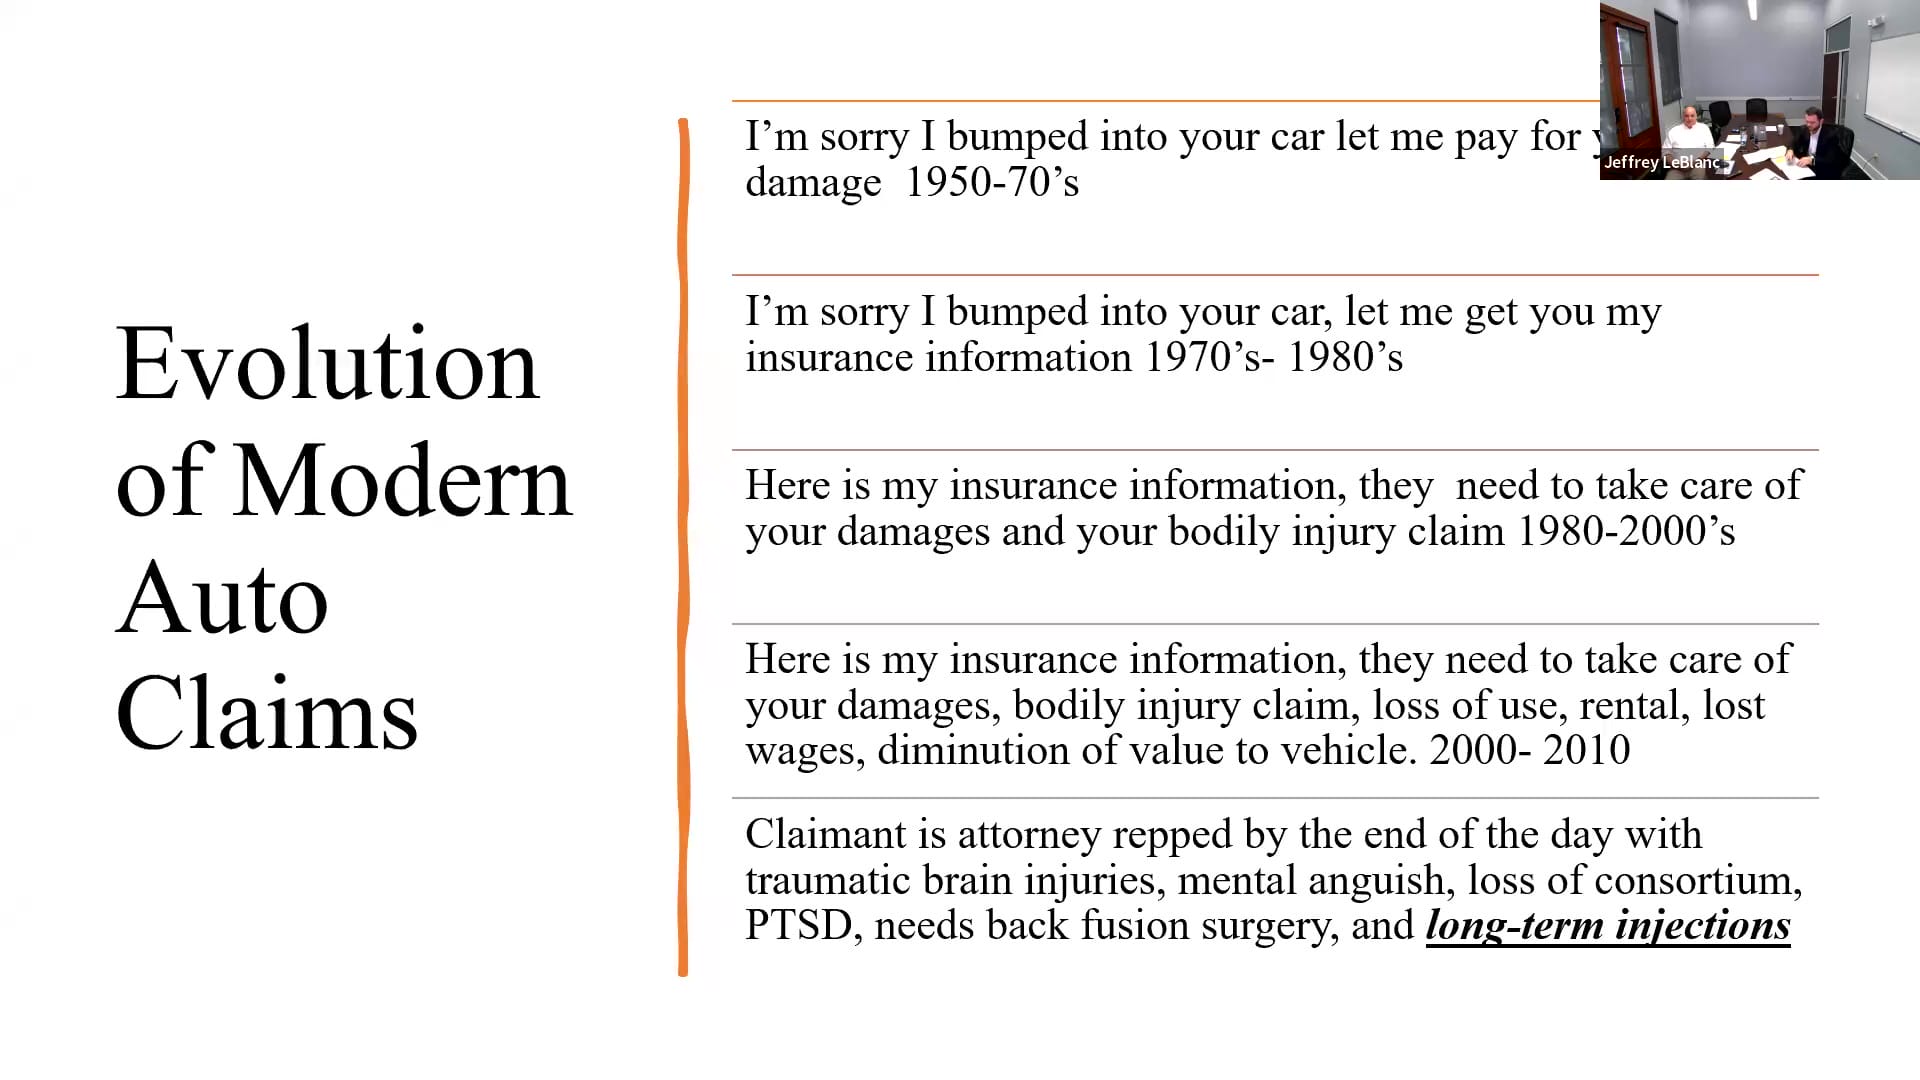 Evolution of Modern Auto Claims